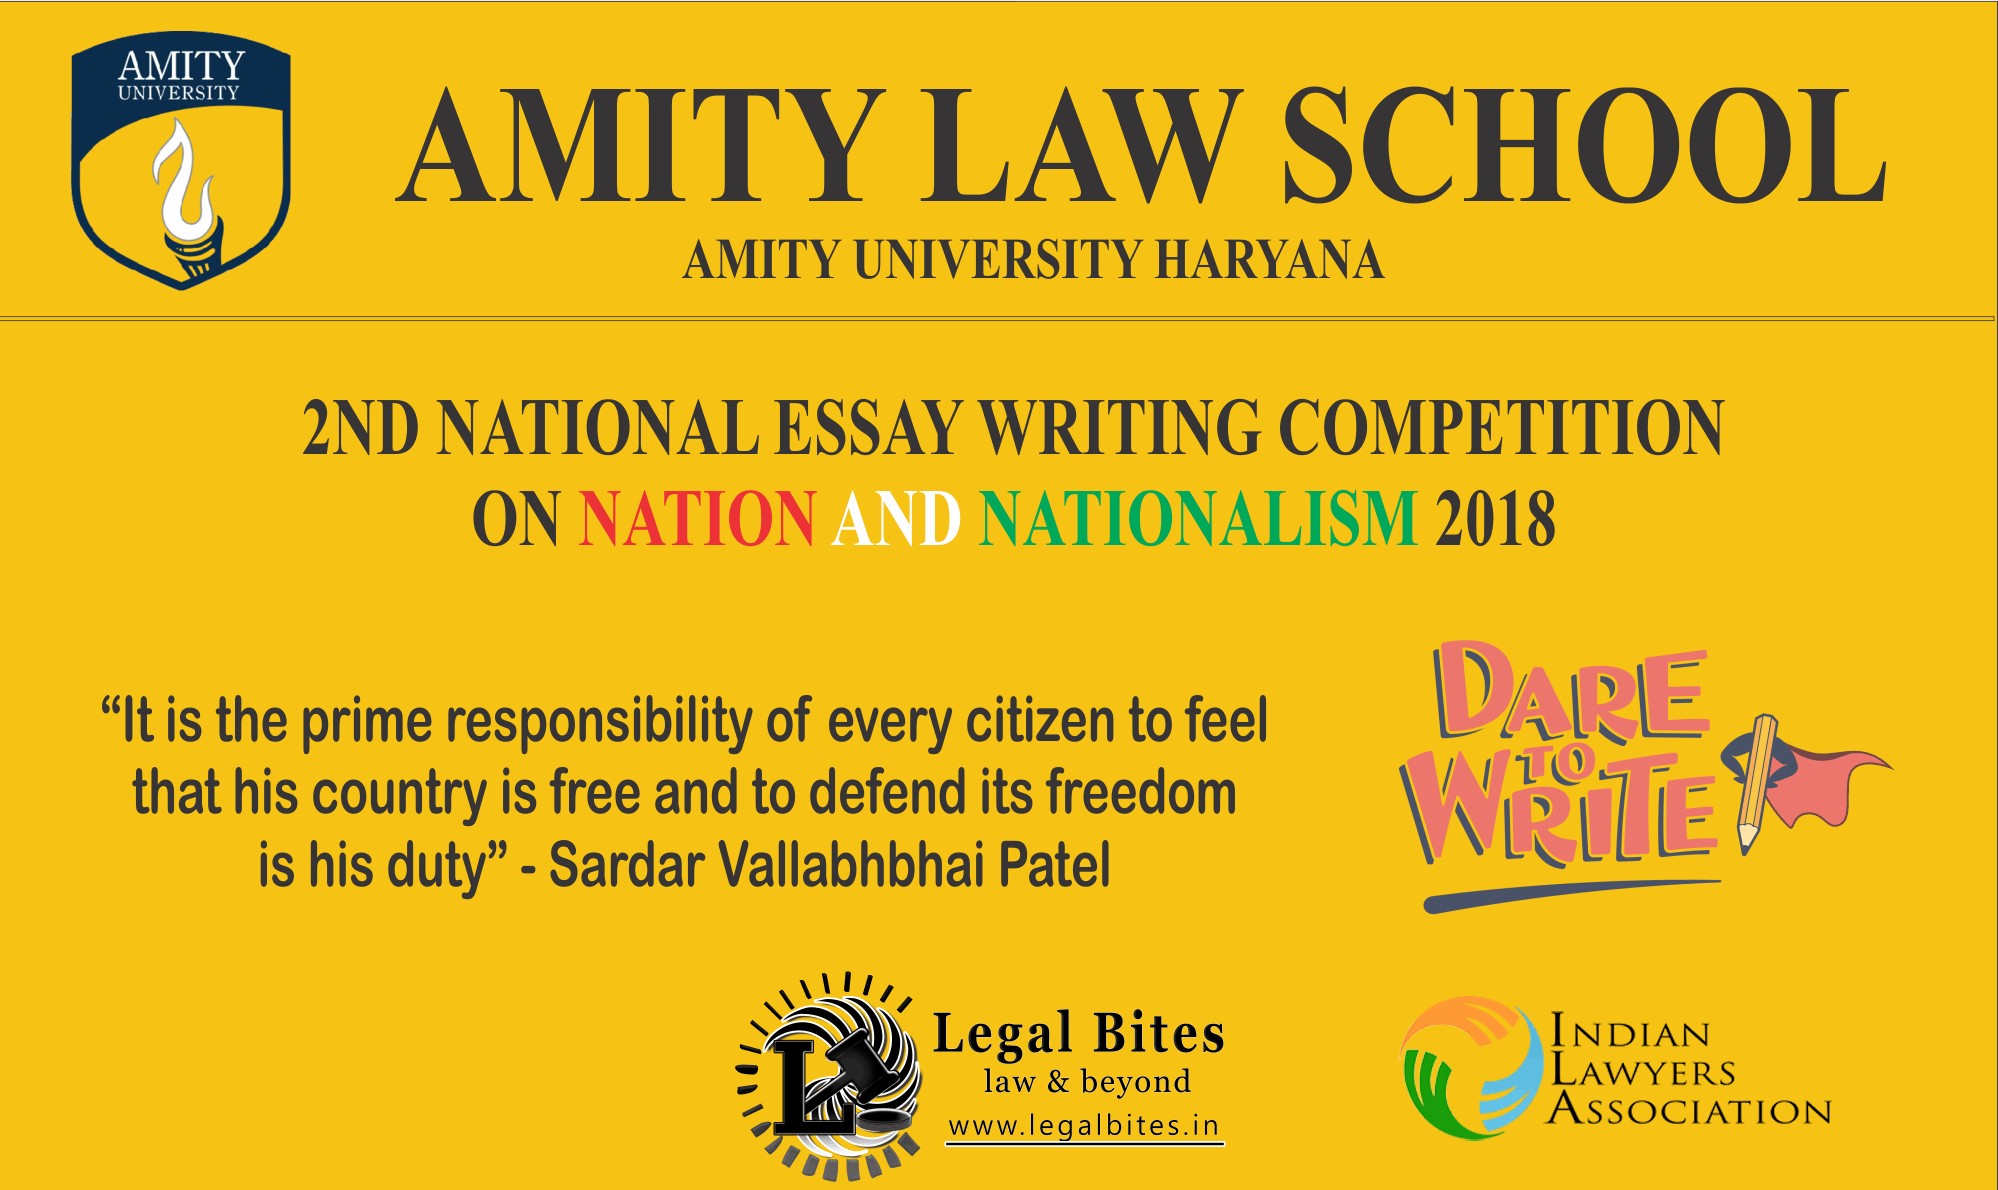 2nd National Essay Writing Competition on Nation and Nationalism 2018